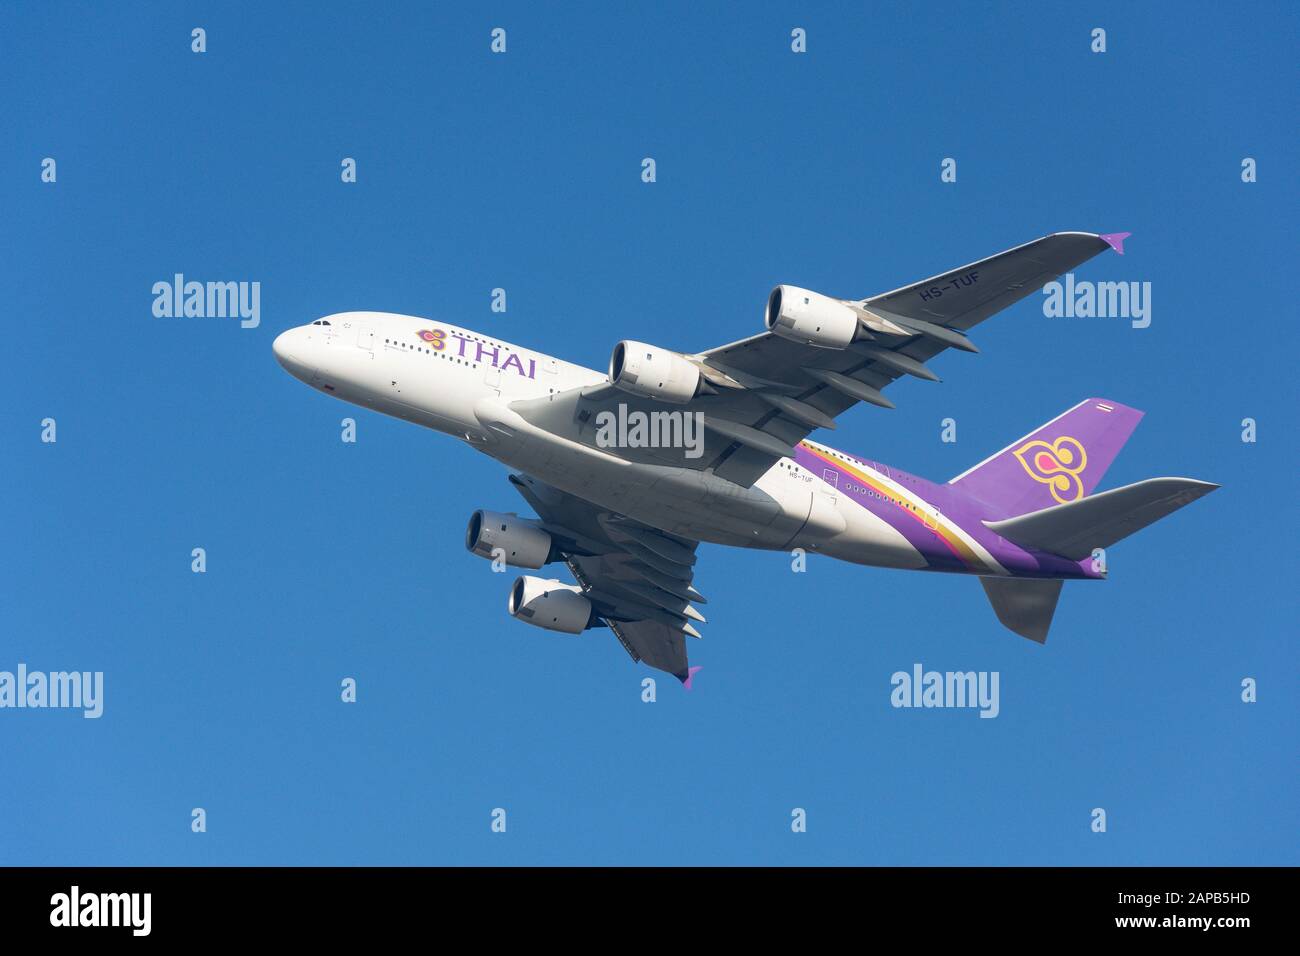 Thai Airways Airbus A380-841 aircraft taking off from Heathrow Airport, London Borough of Hillingdon, Greater London, England, United Kingdom Stock Photo